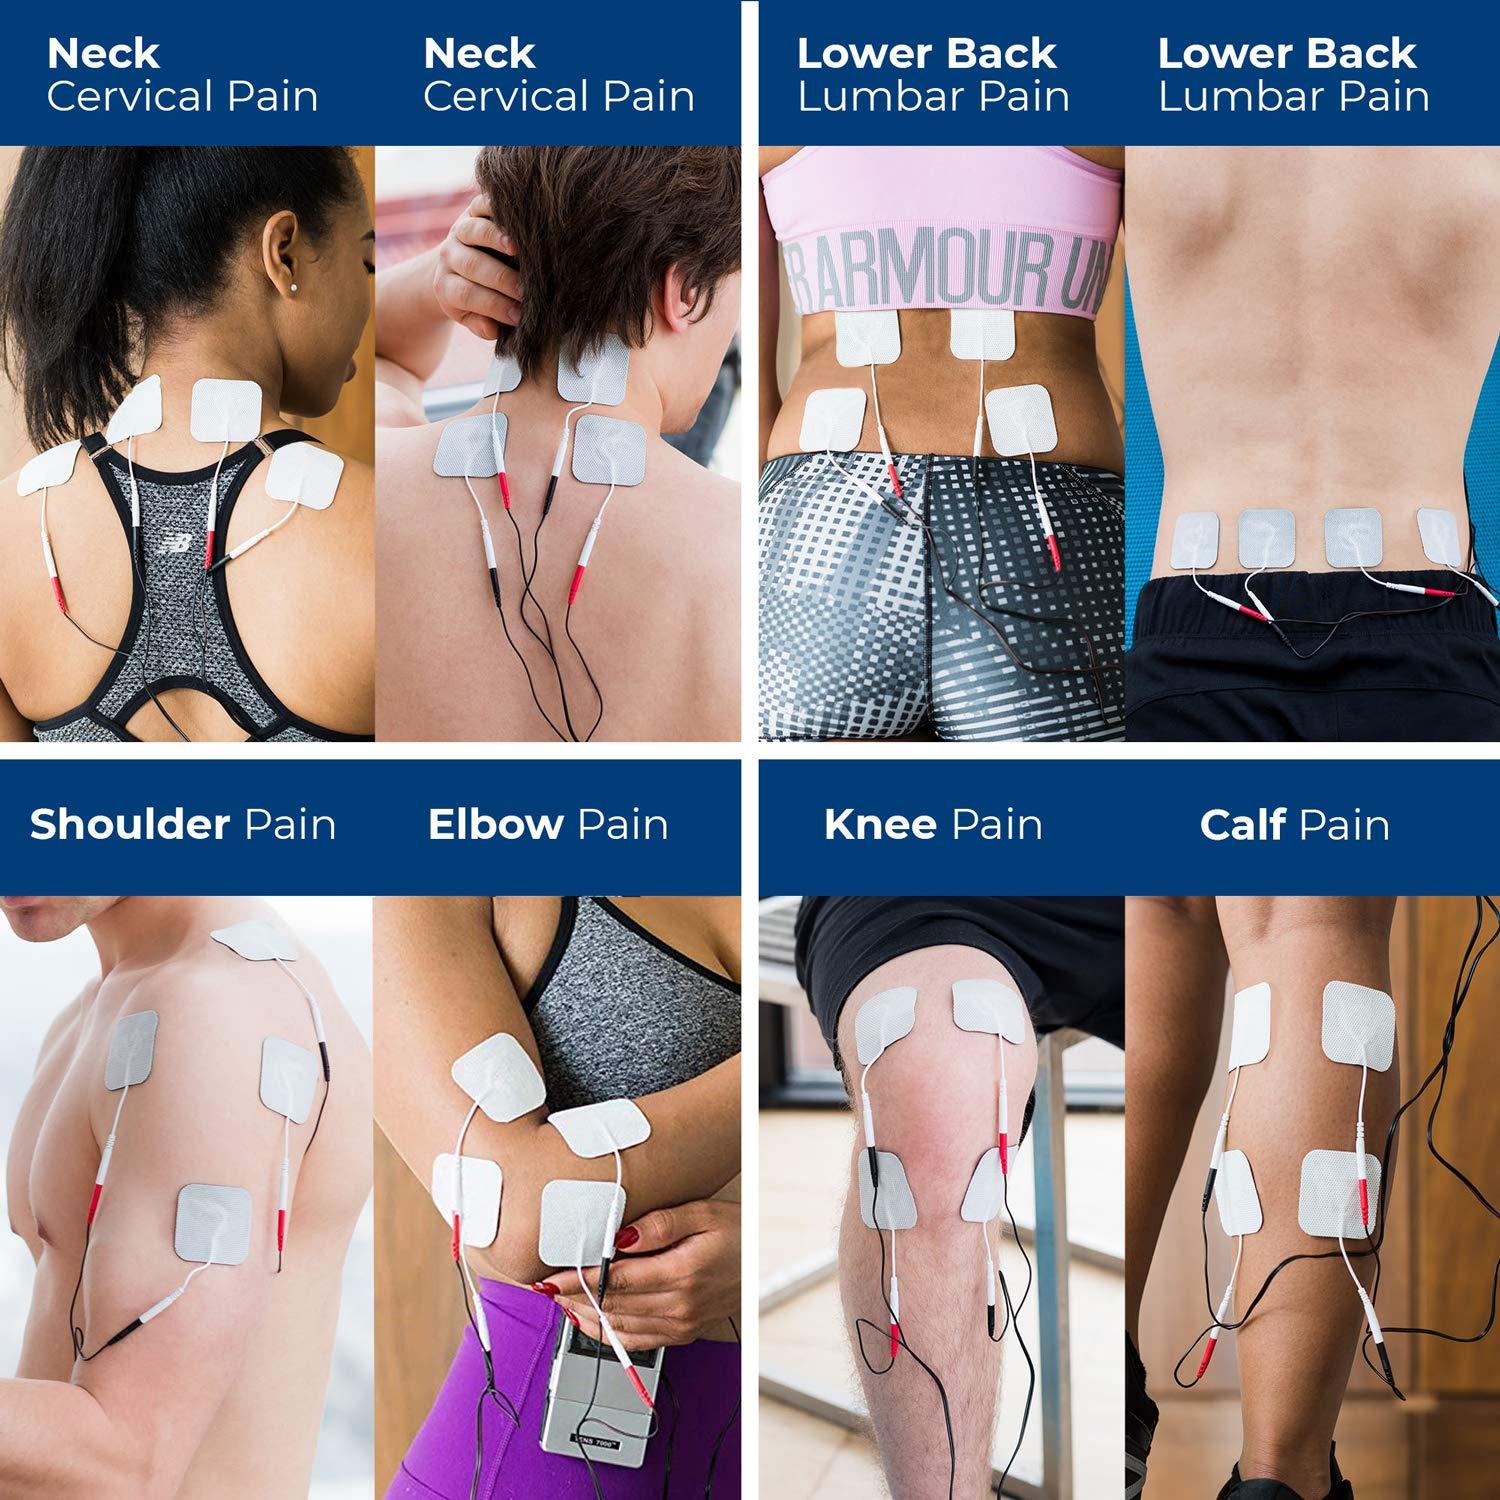 TENS Therapy for Back Pain Relief – TENS 7000